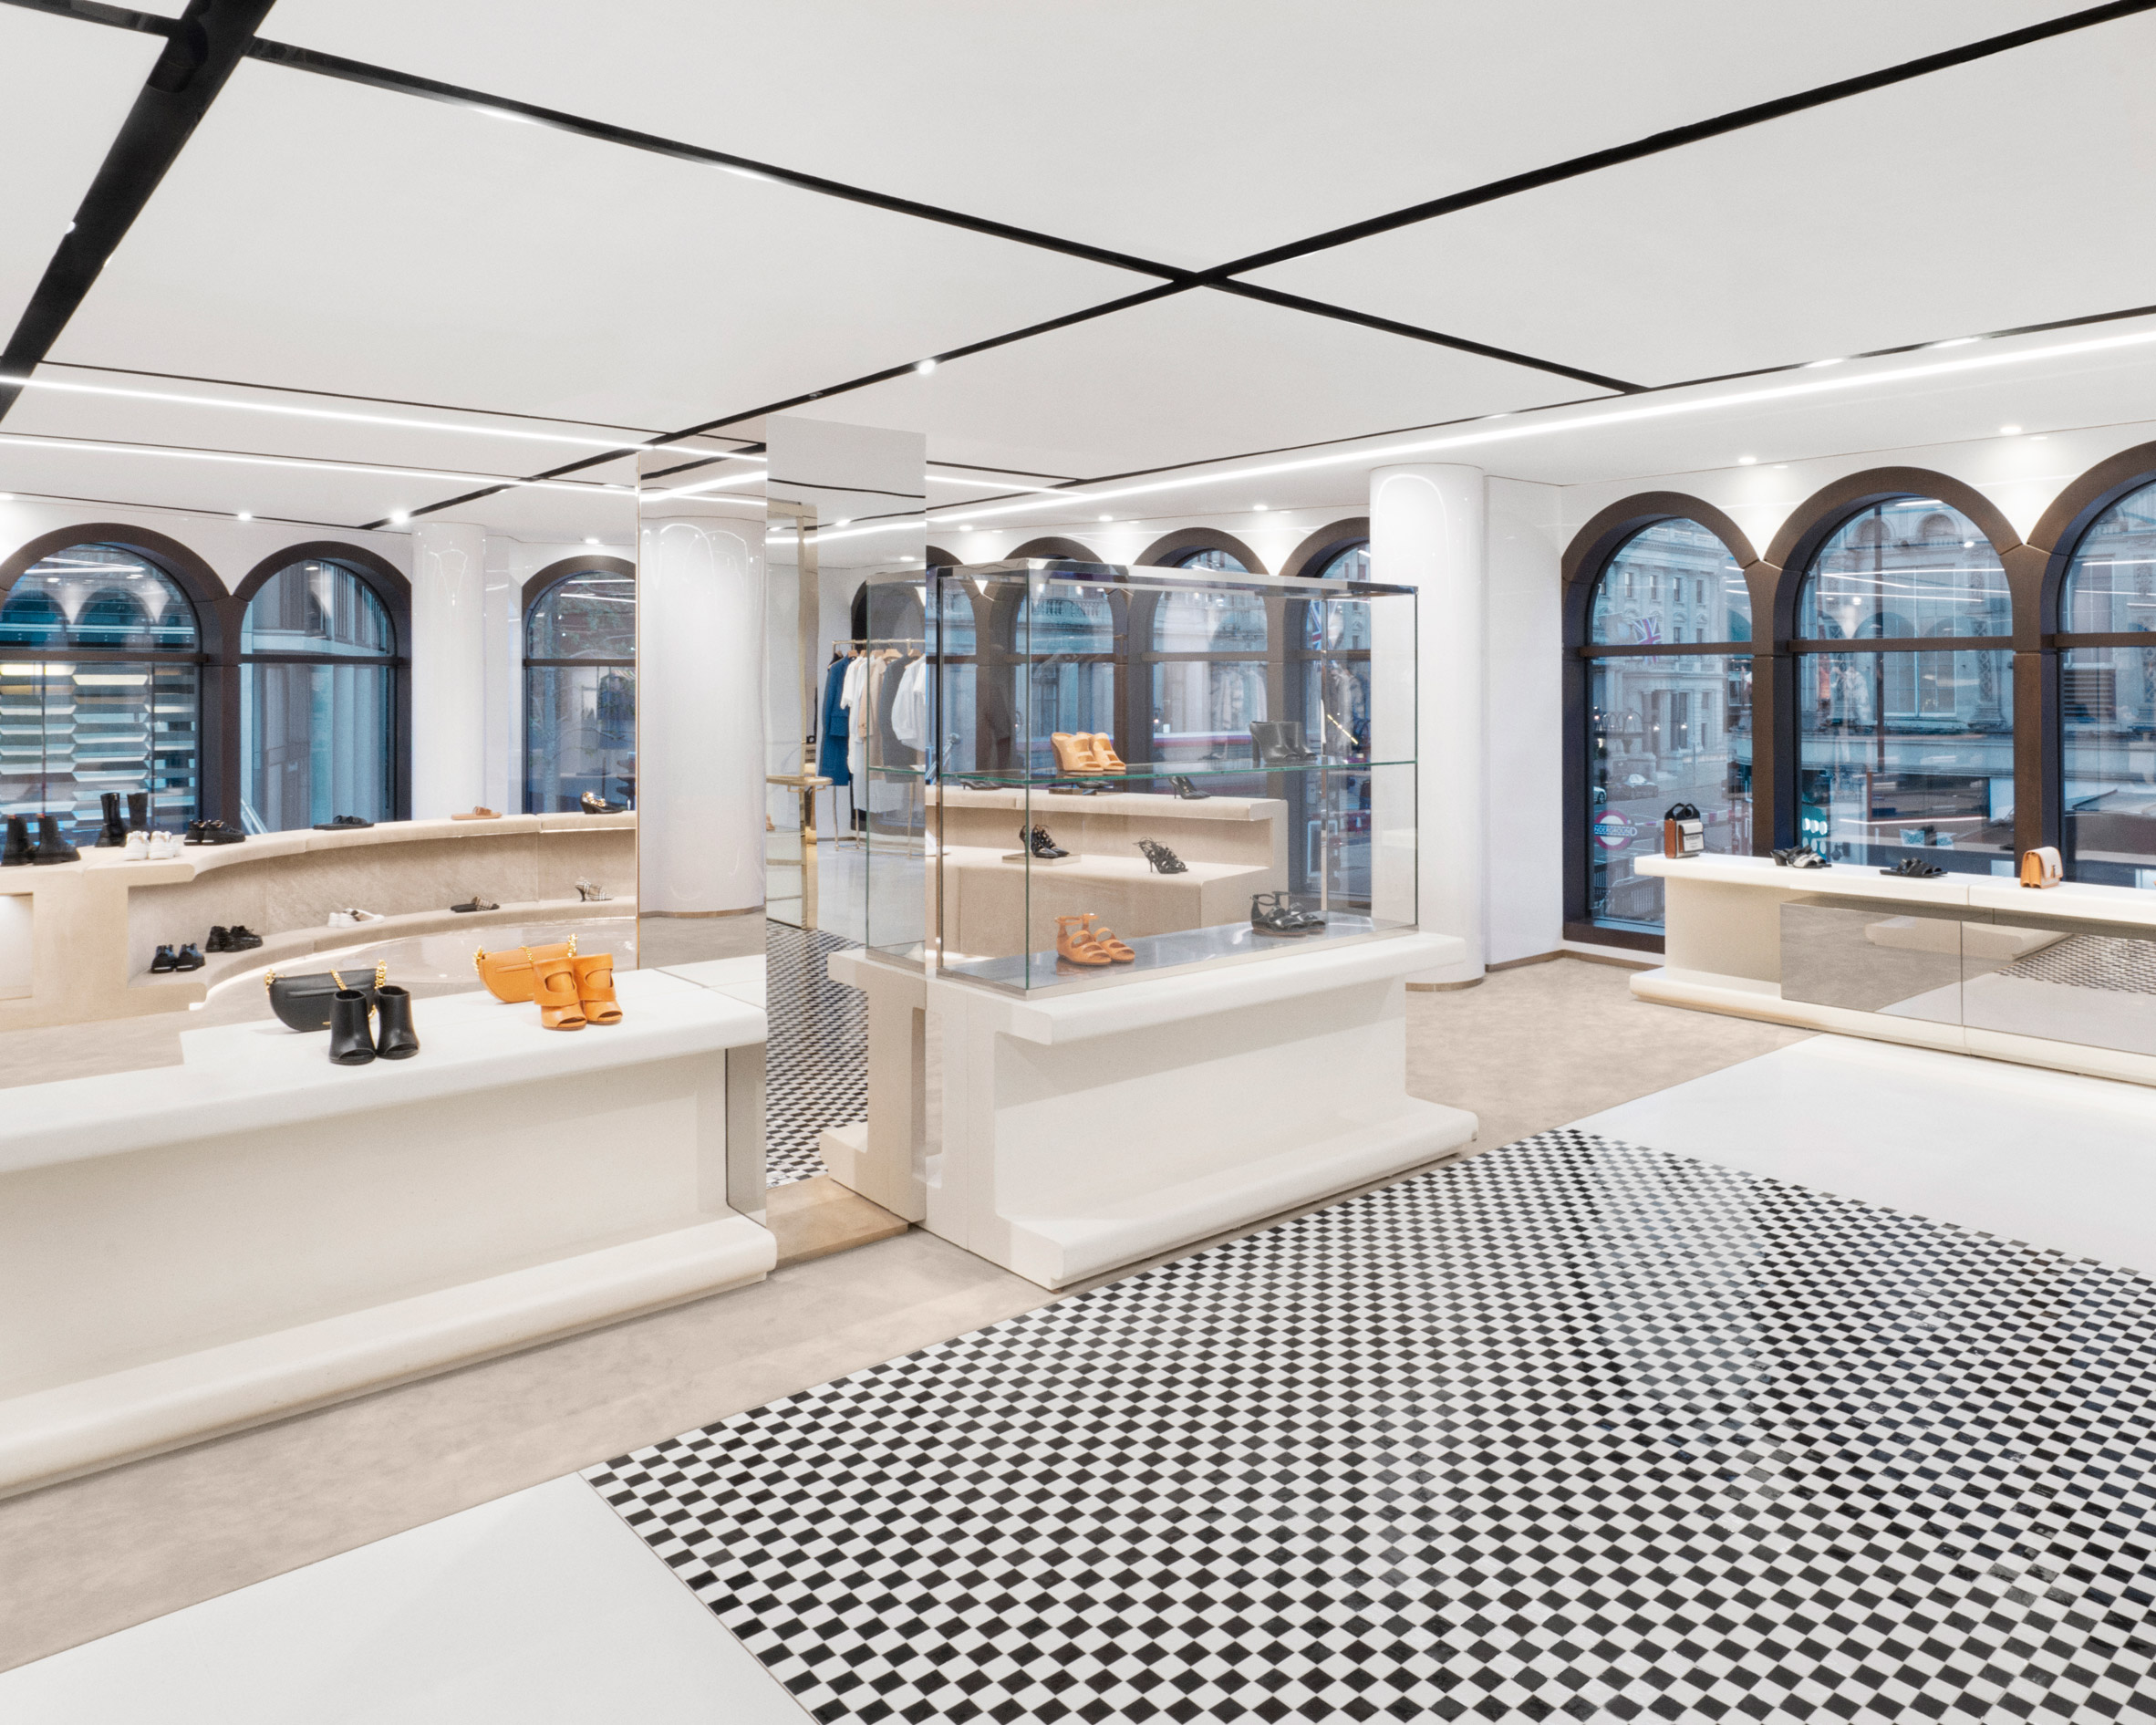 Burberry's London Flagship Combines Craftsmanship and Technology